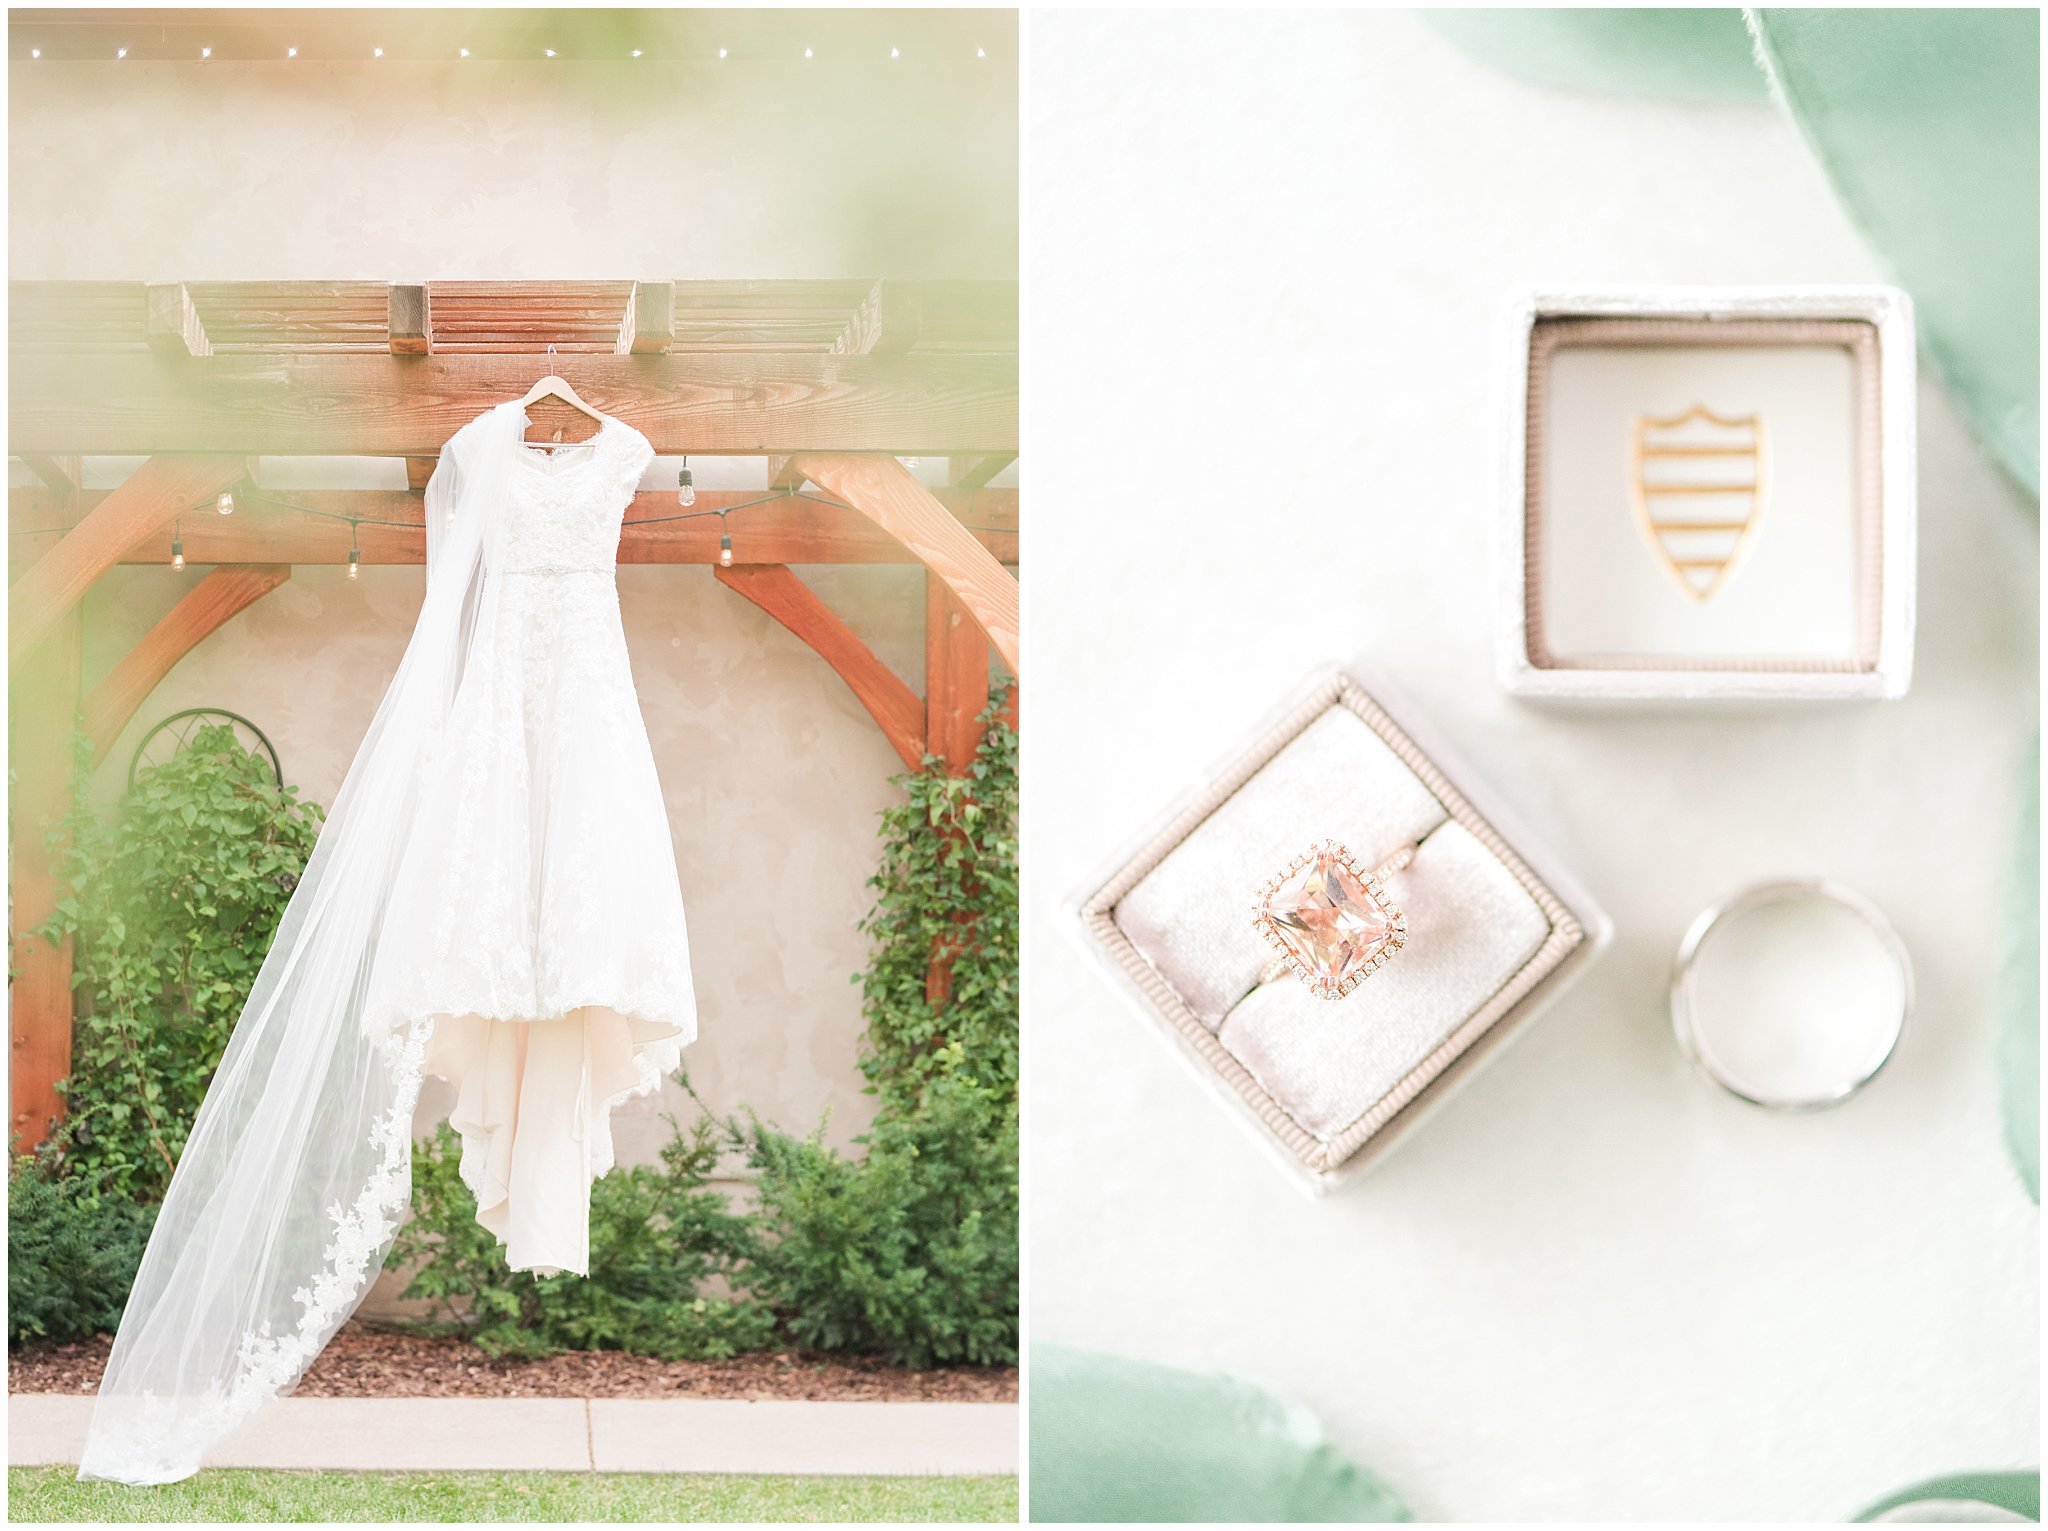 Dress and ring shots at Oak Hills Reception and Event Center| Top Utah Wedding and Couples Photos 2019 | Jessie and Dallin Photography